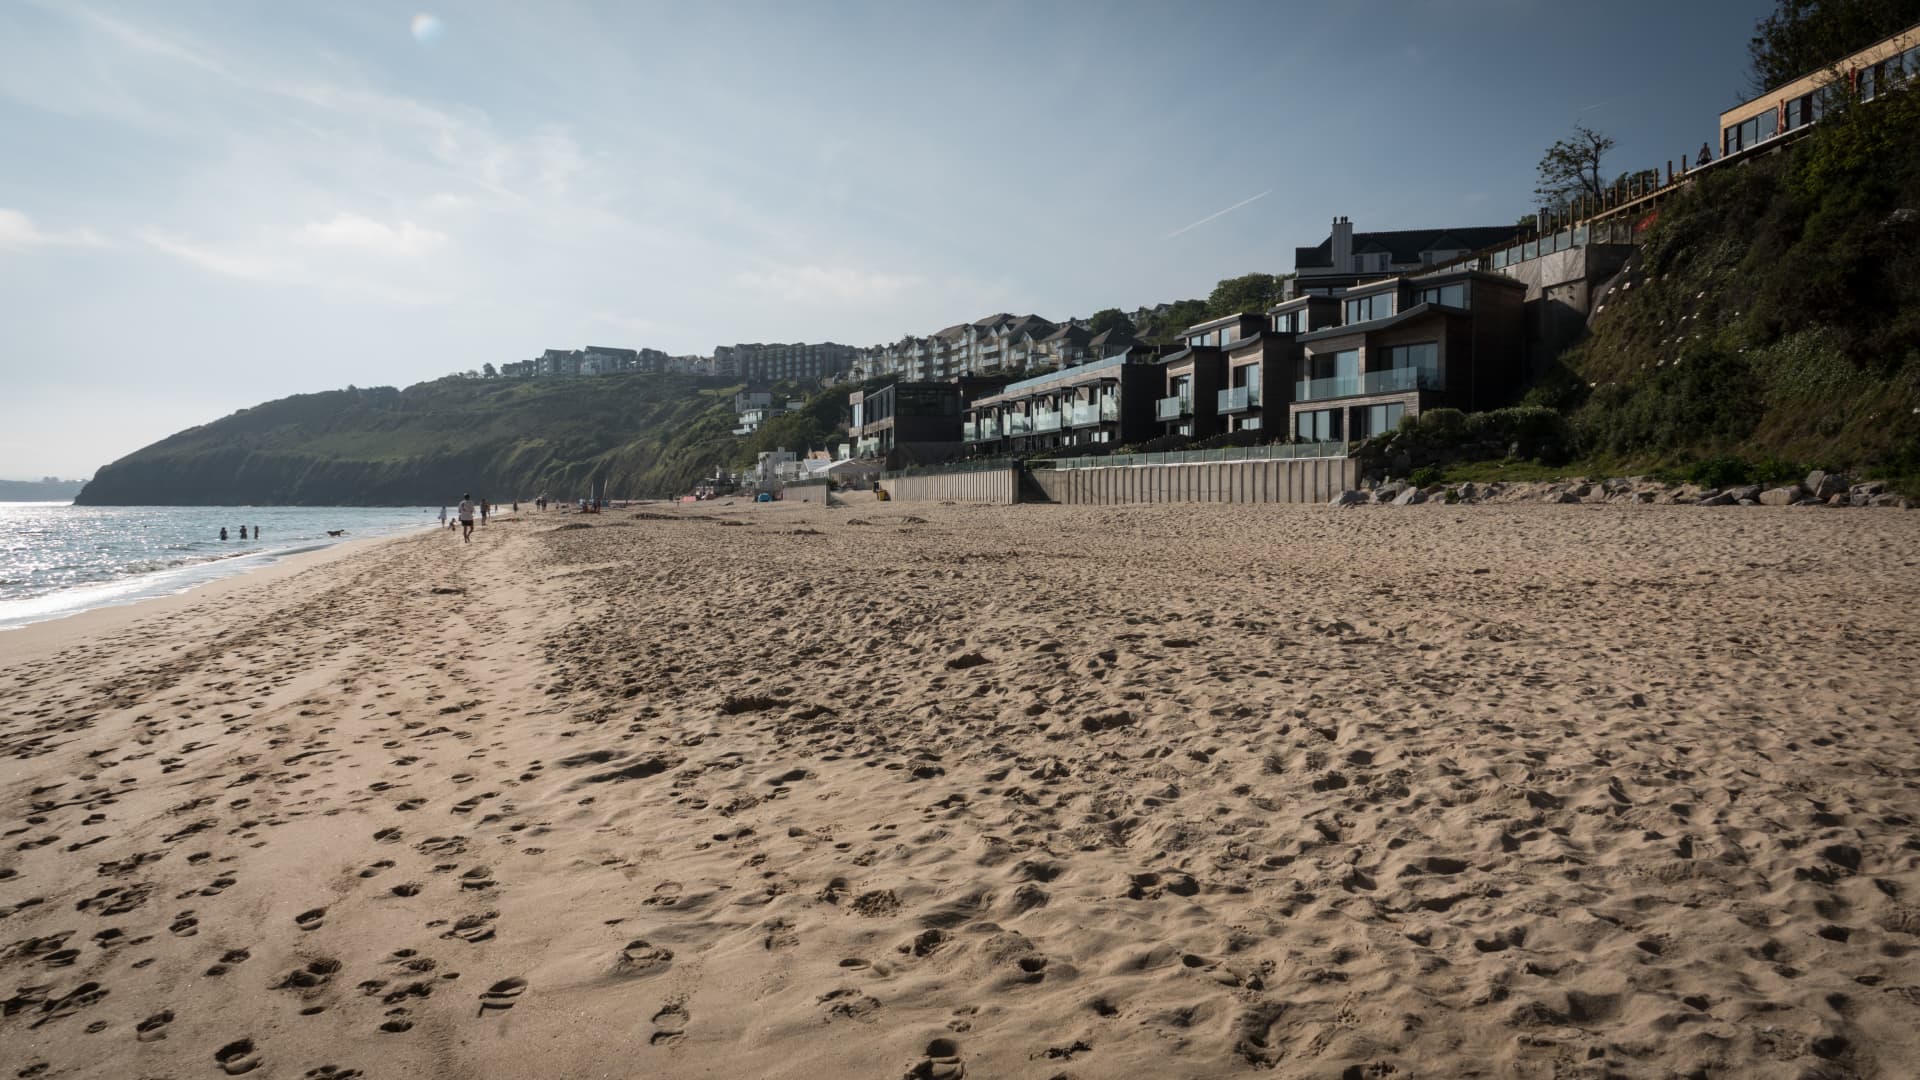 The Carbis Bay Estate hotel and beach, which is set to be the main venue for the upcoming G7 summit, is seen from the beach on June 2, 2021 in St Ives, Cornwall.